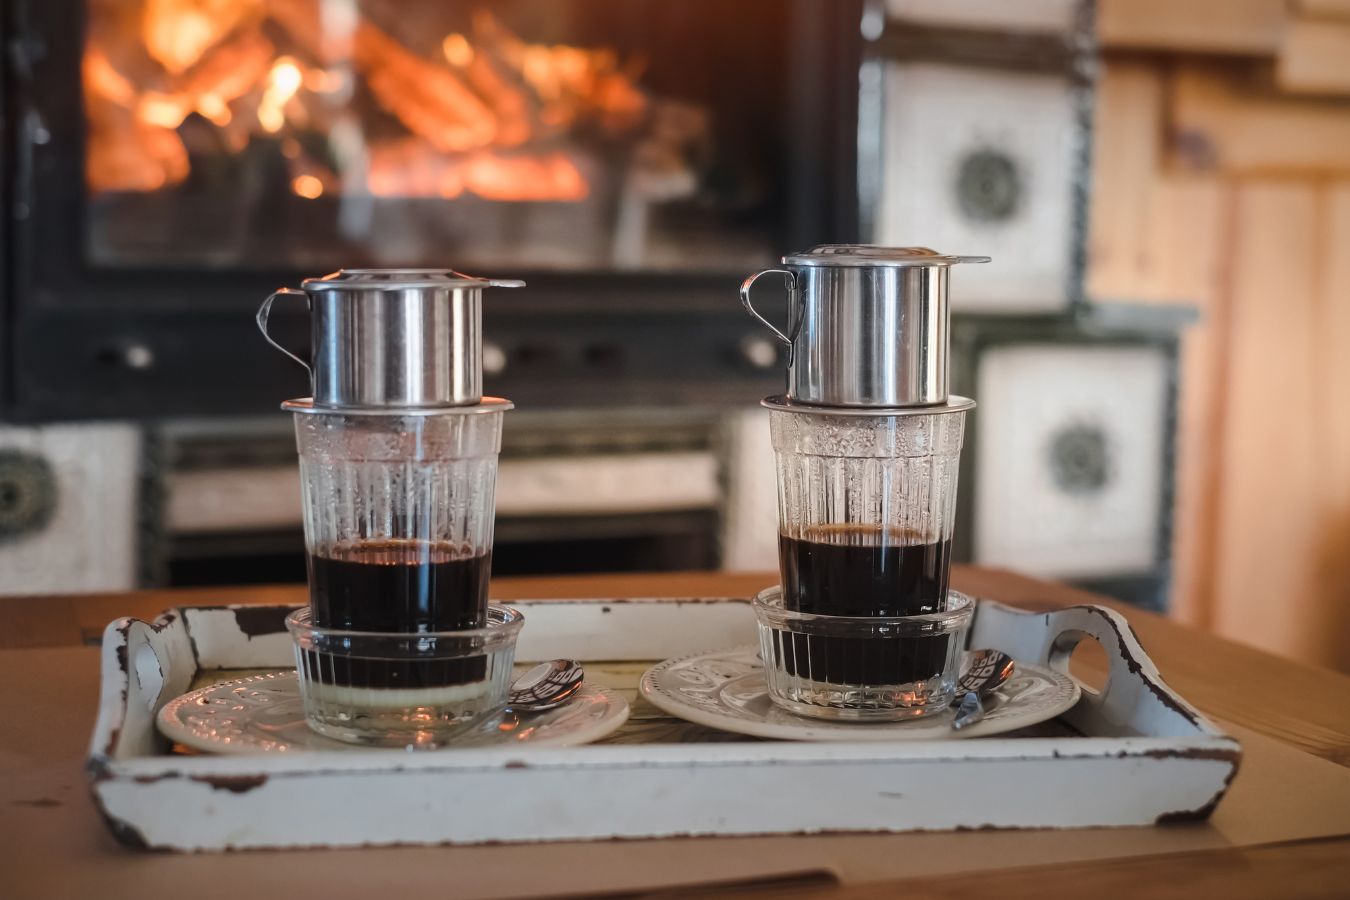 What Makes Vietnamese Coffee So Different?